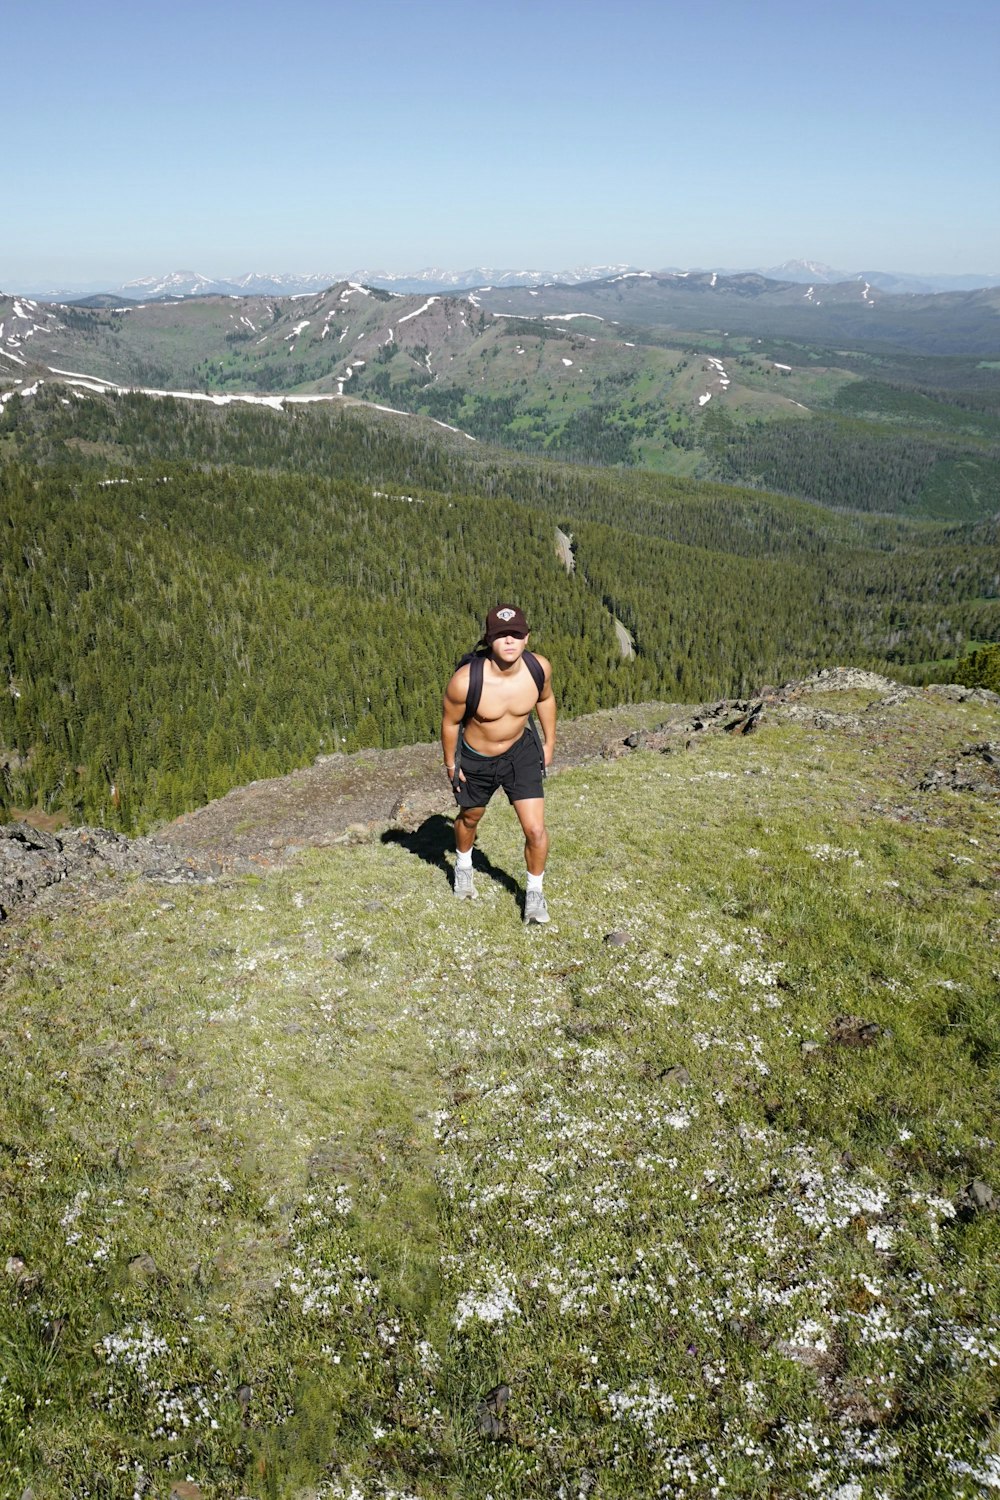 a man hiking up a hill in the mountains